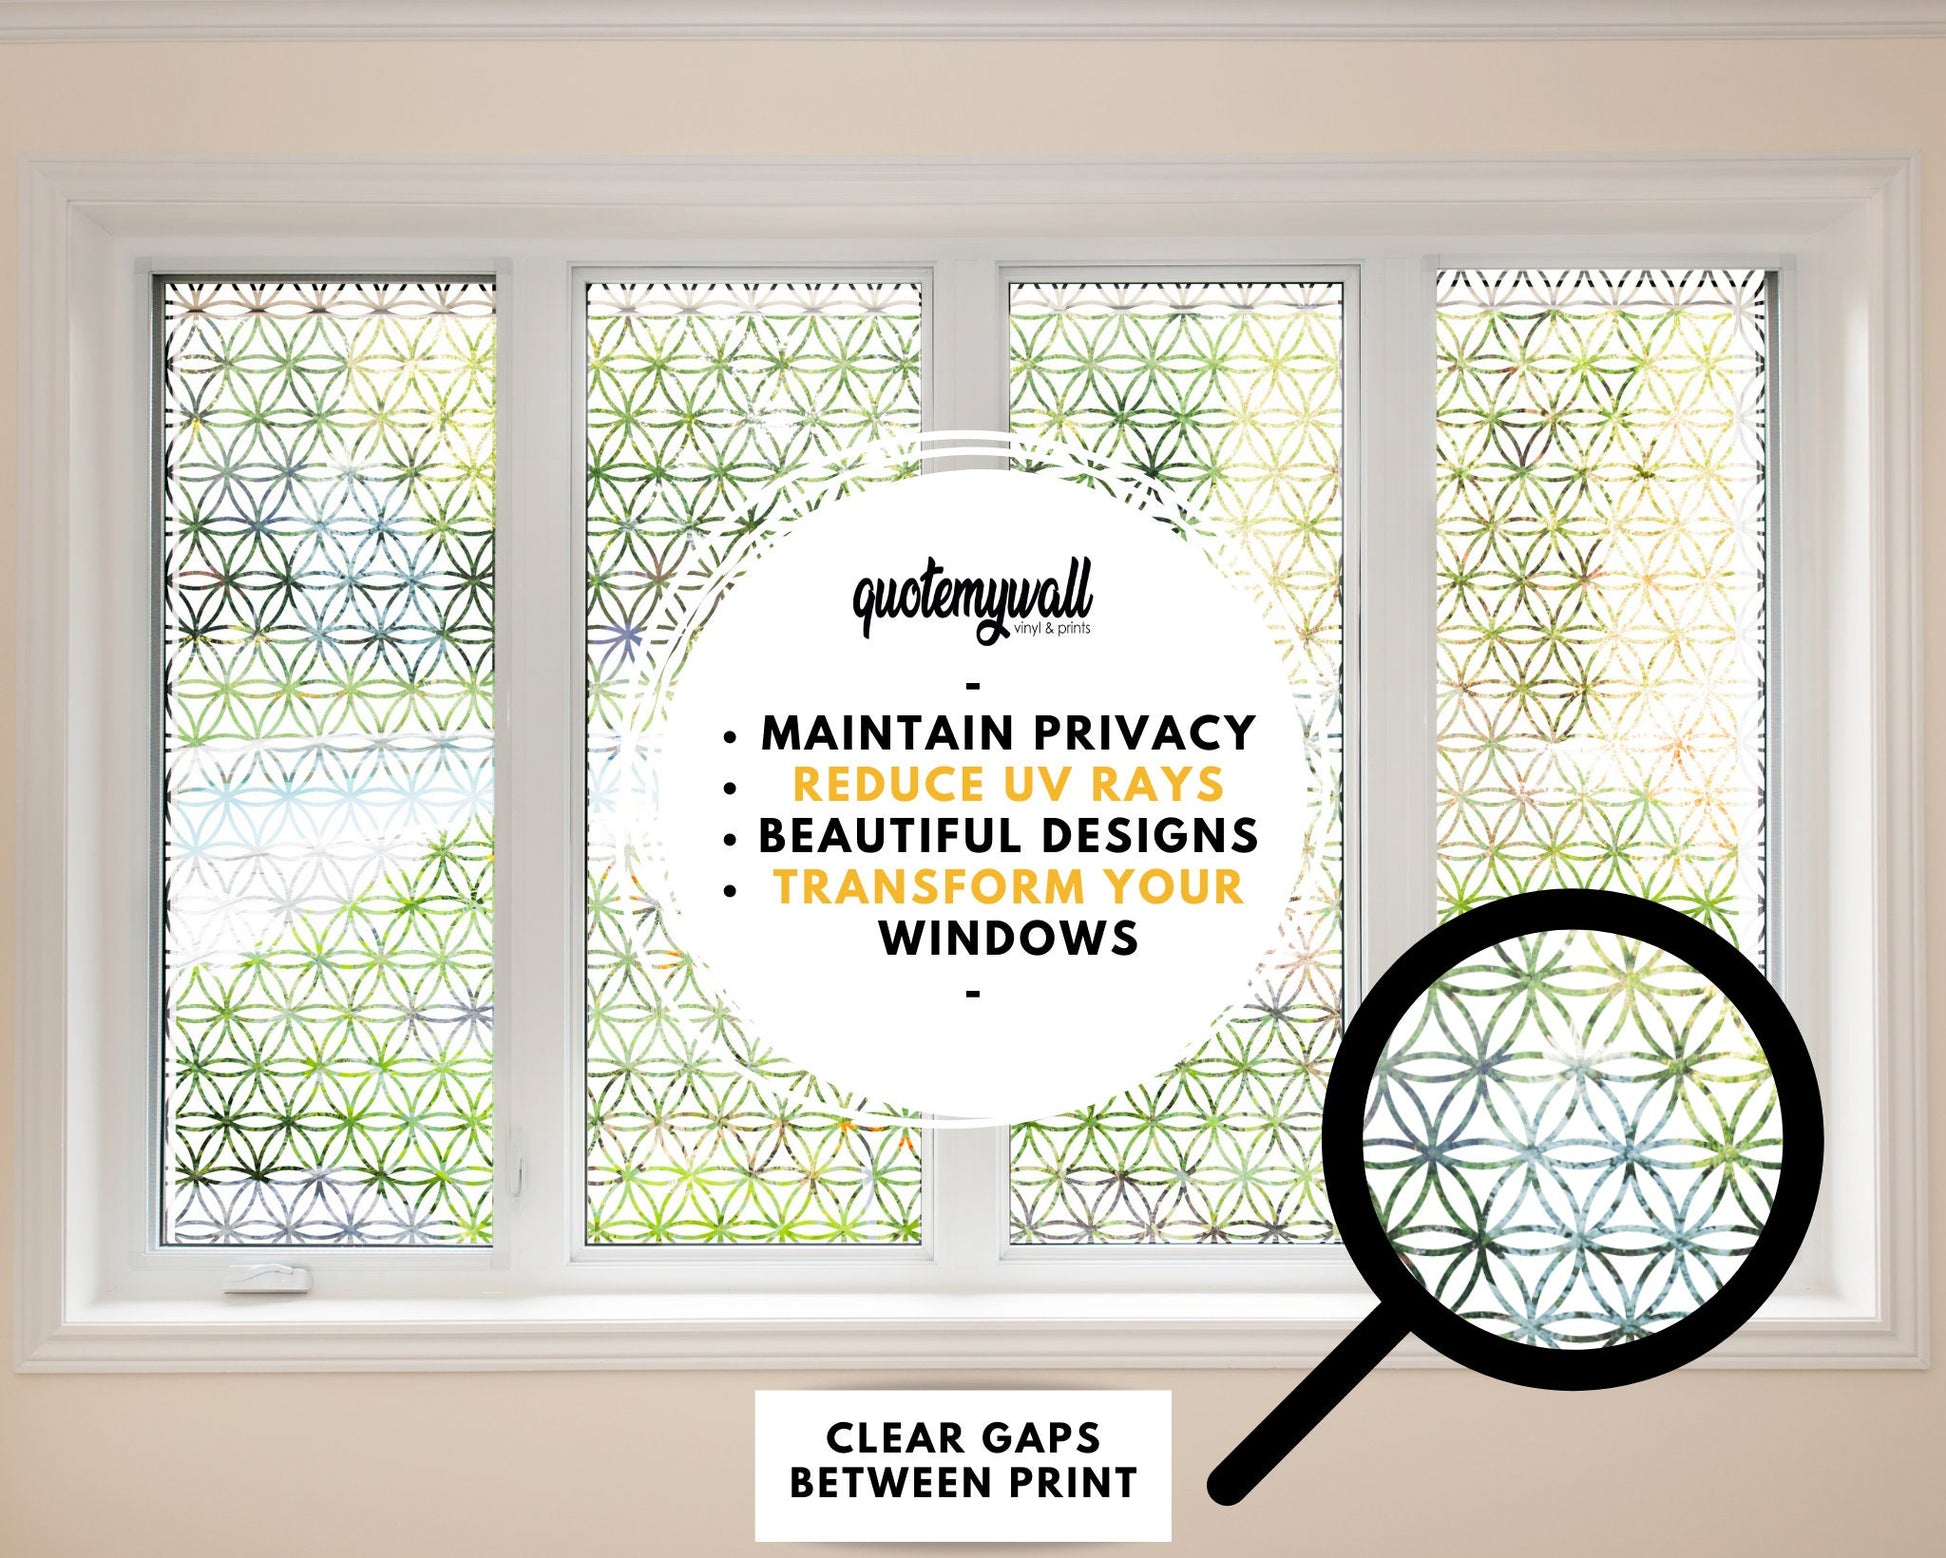 Decorative Circles Pattern Window Privacy Film Cling Static Cling Glass Sticker Non Adhesive UV Heat Control Frosted Glass